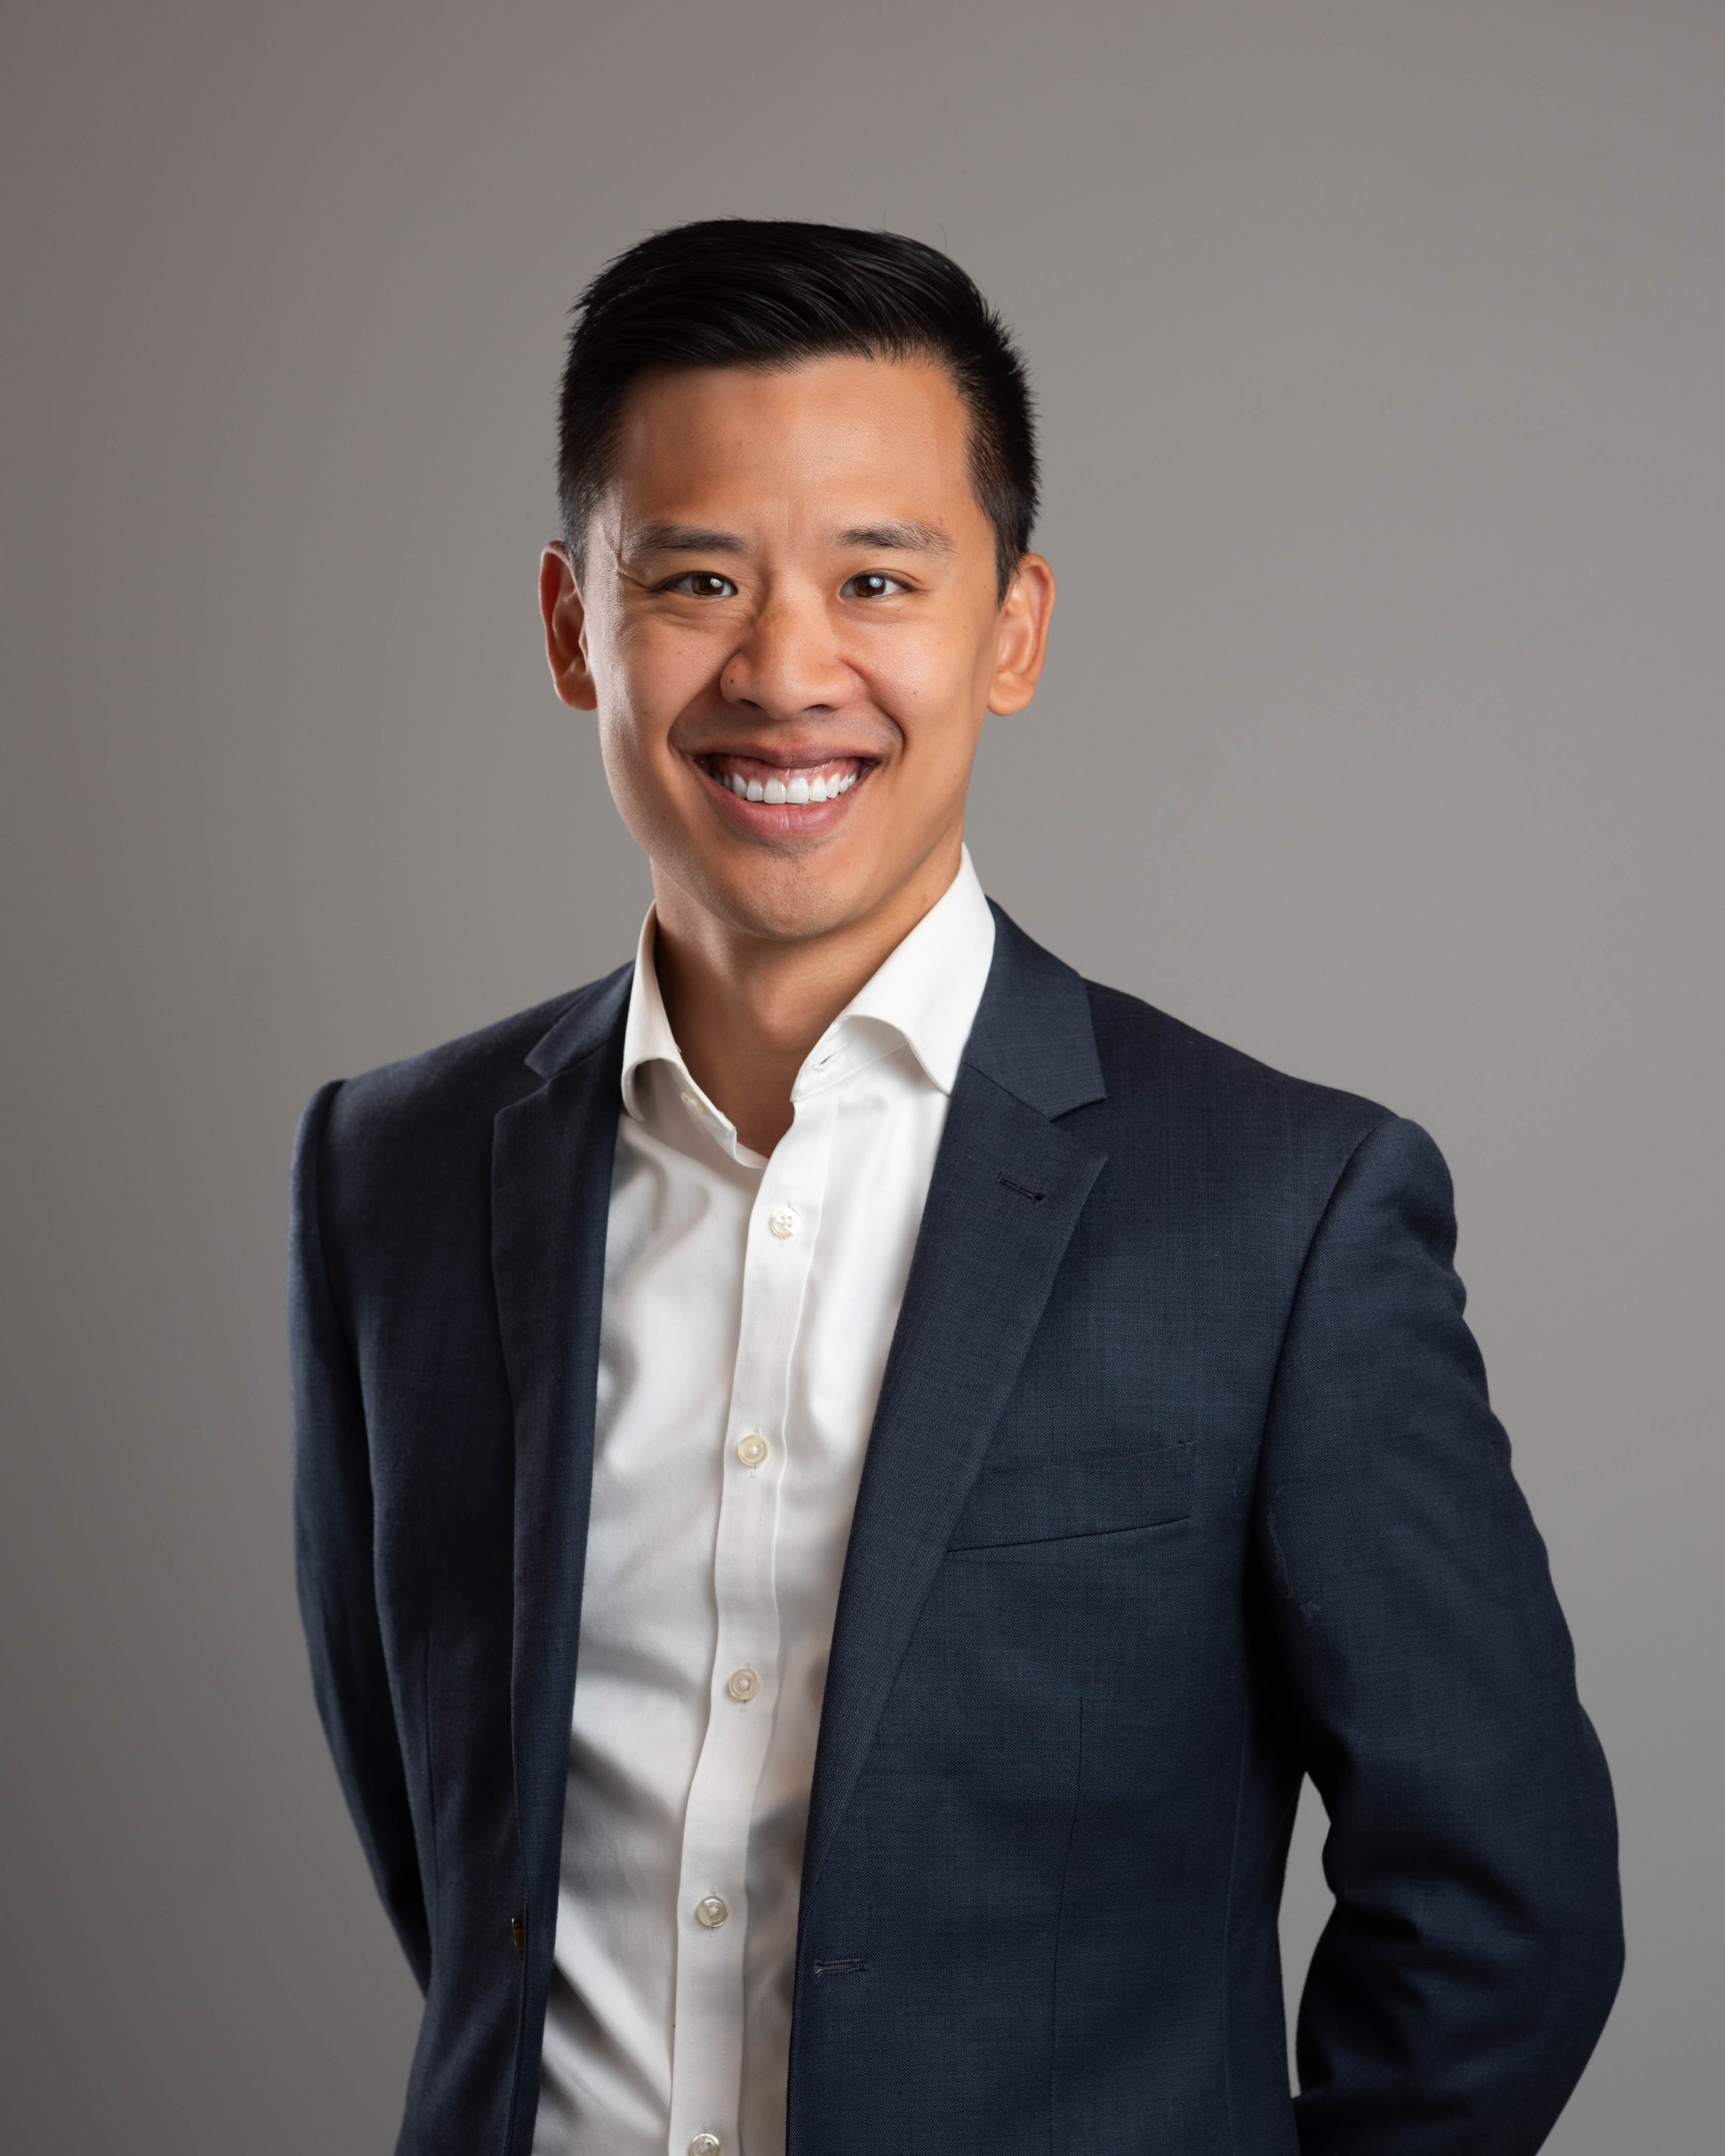 Adrian Lee, Ph.D. Associate Director, Corporate Strategy and Operations at Precede Biosciences